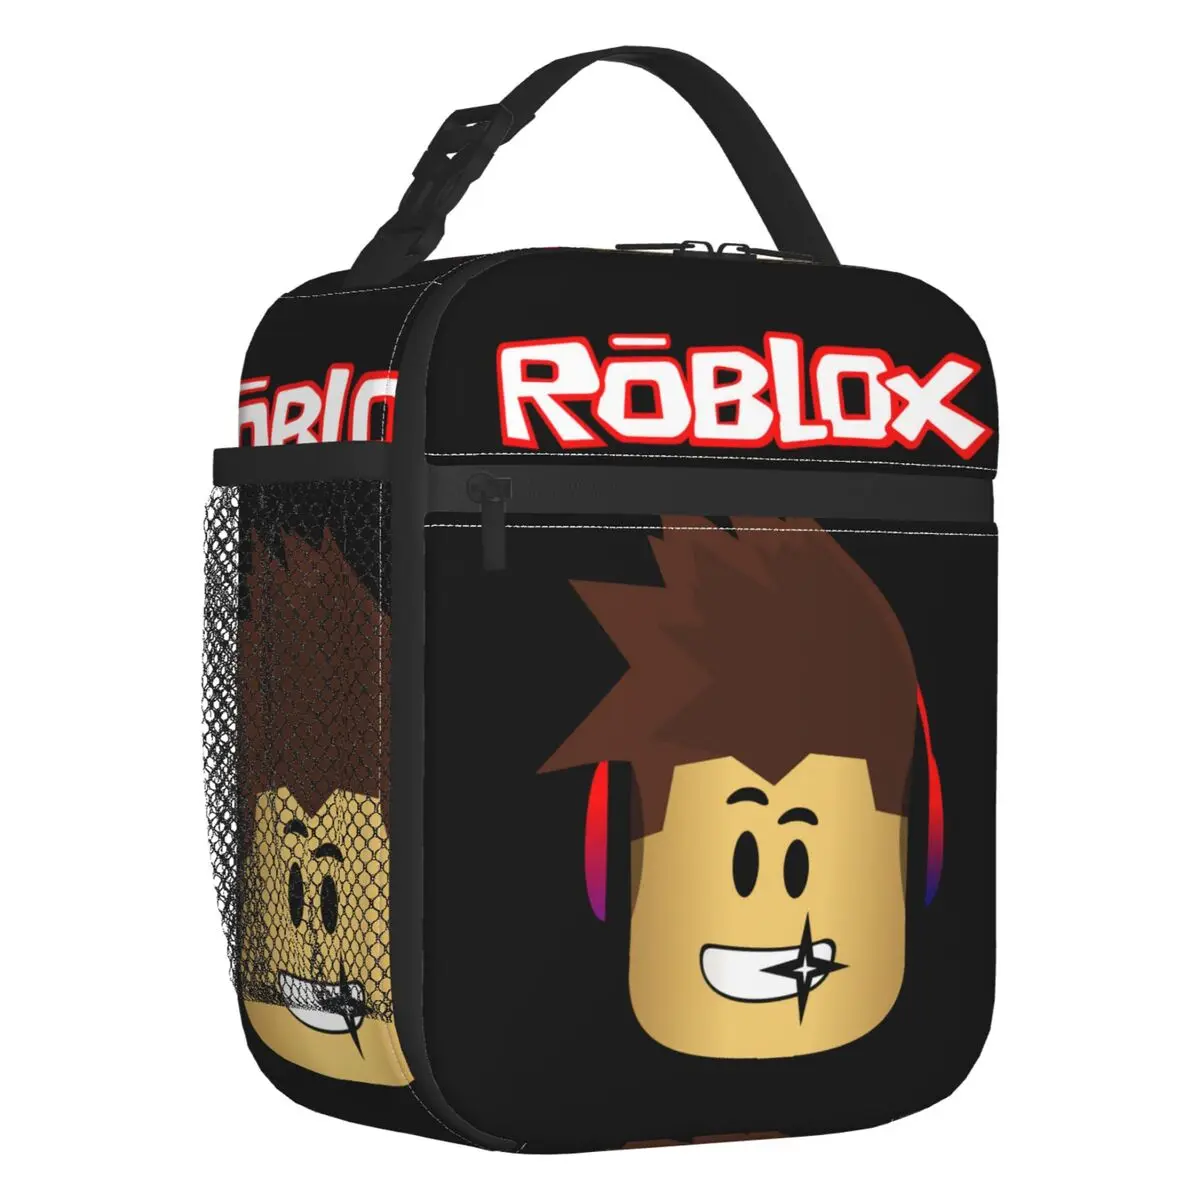 Robloxs Face And Logo Insulated Lunch Tote Bag for Women Video Game Resuable Cooler Thermal Food Lunch Box Outdoor Camping